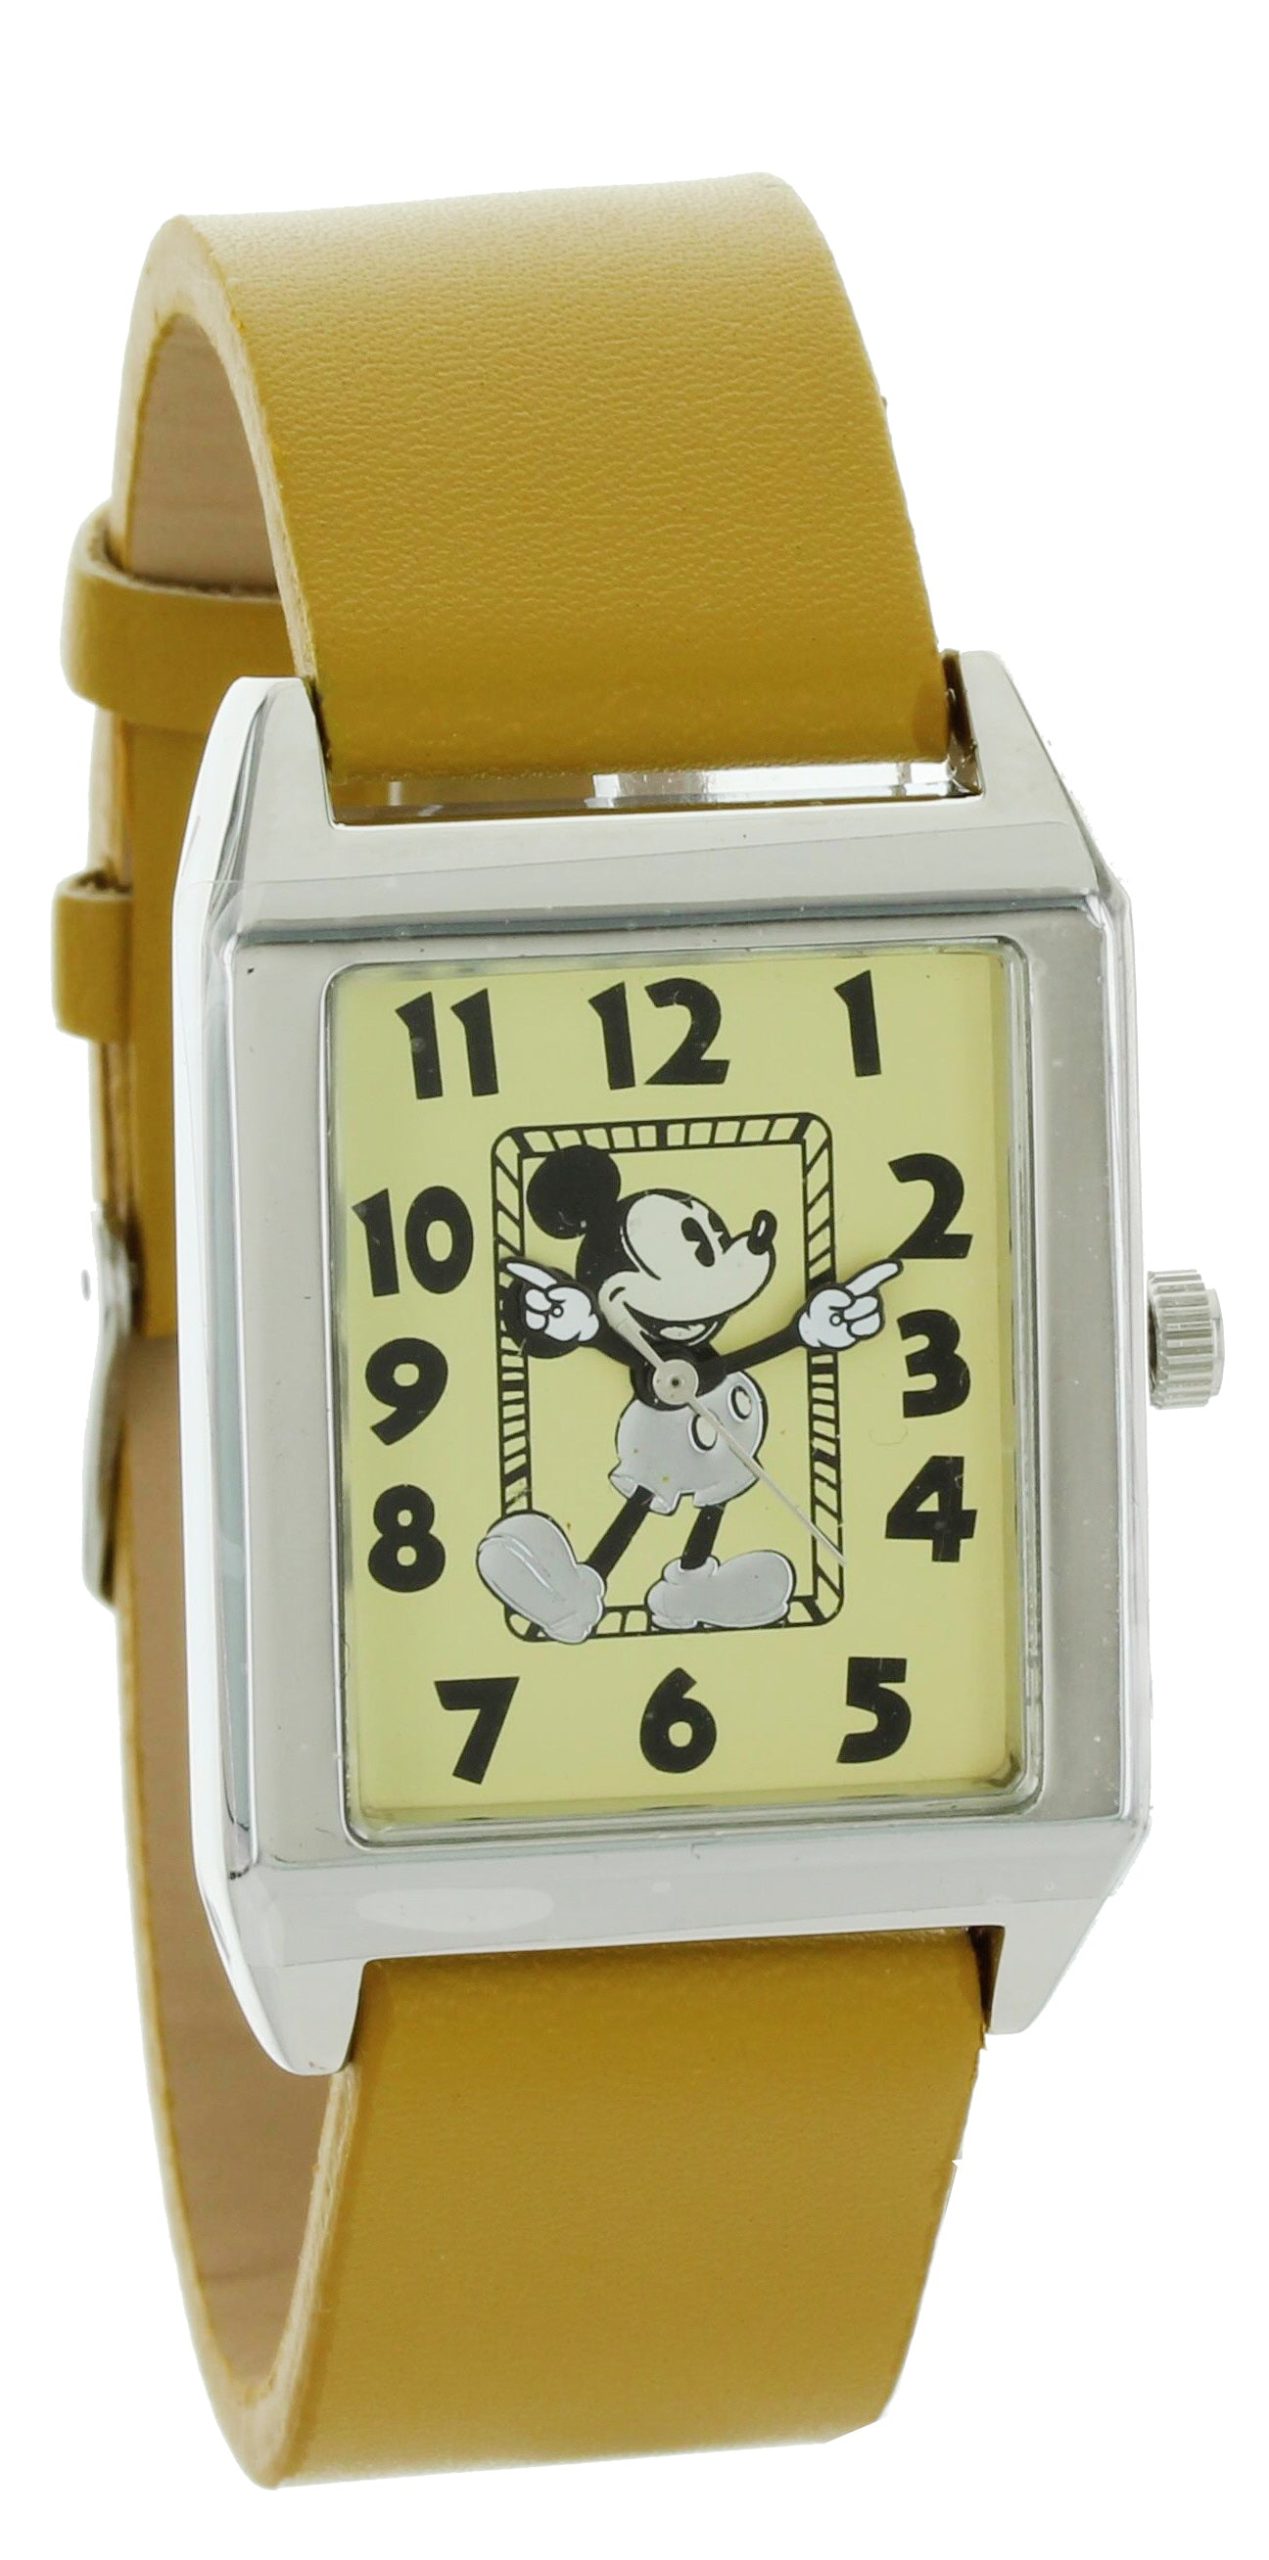 Model: Disney Mickey Mouse Rectangle Watch with Leather Band